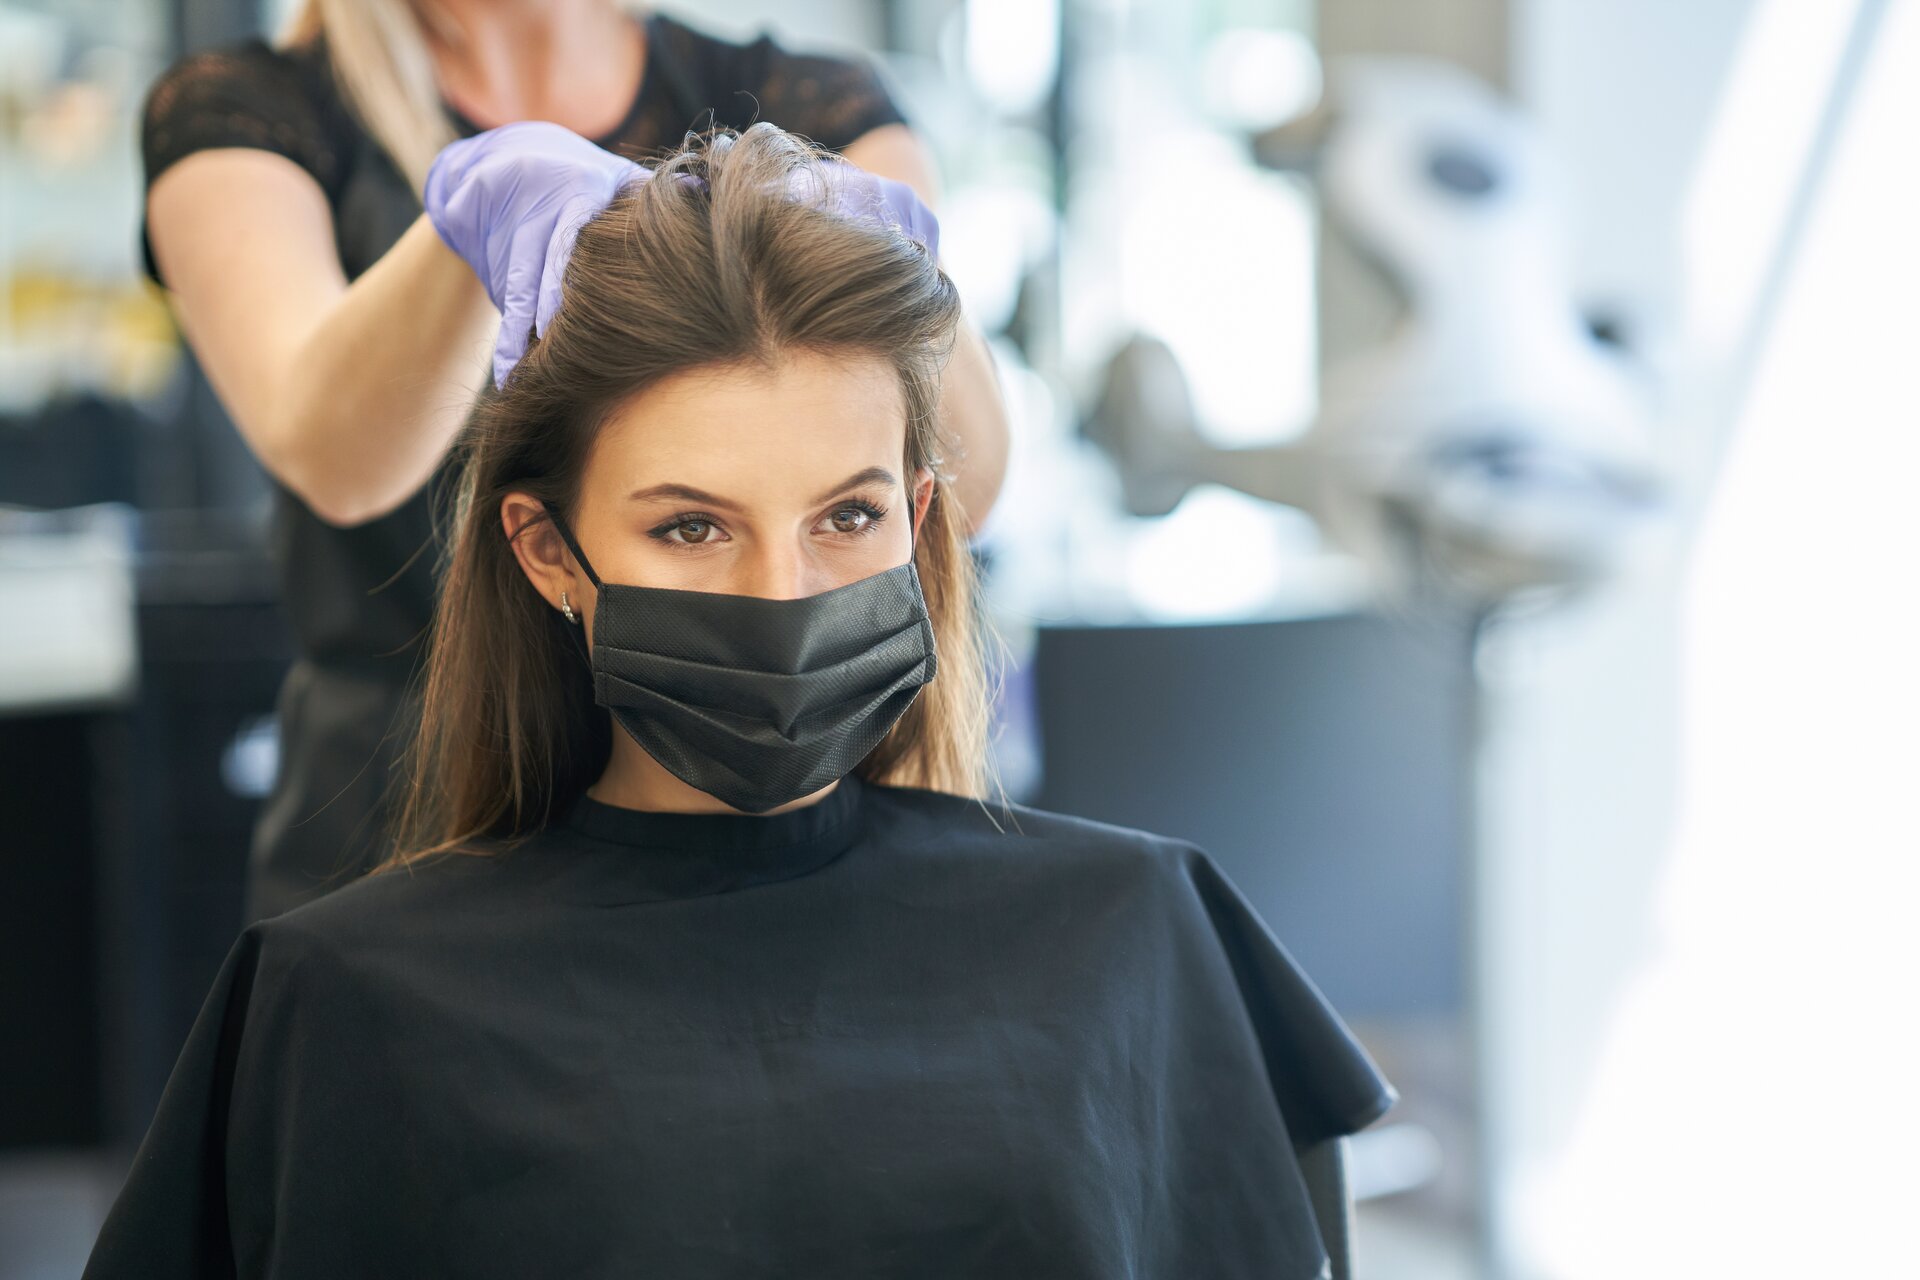 stock-photo-adult-woman-at-hairdresser-wearing-protective-mask-due-to-coronavirus-pandemic-1756653821